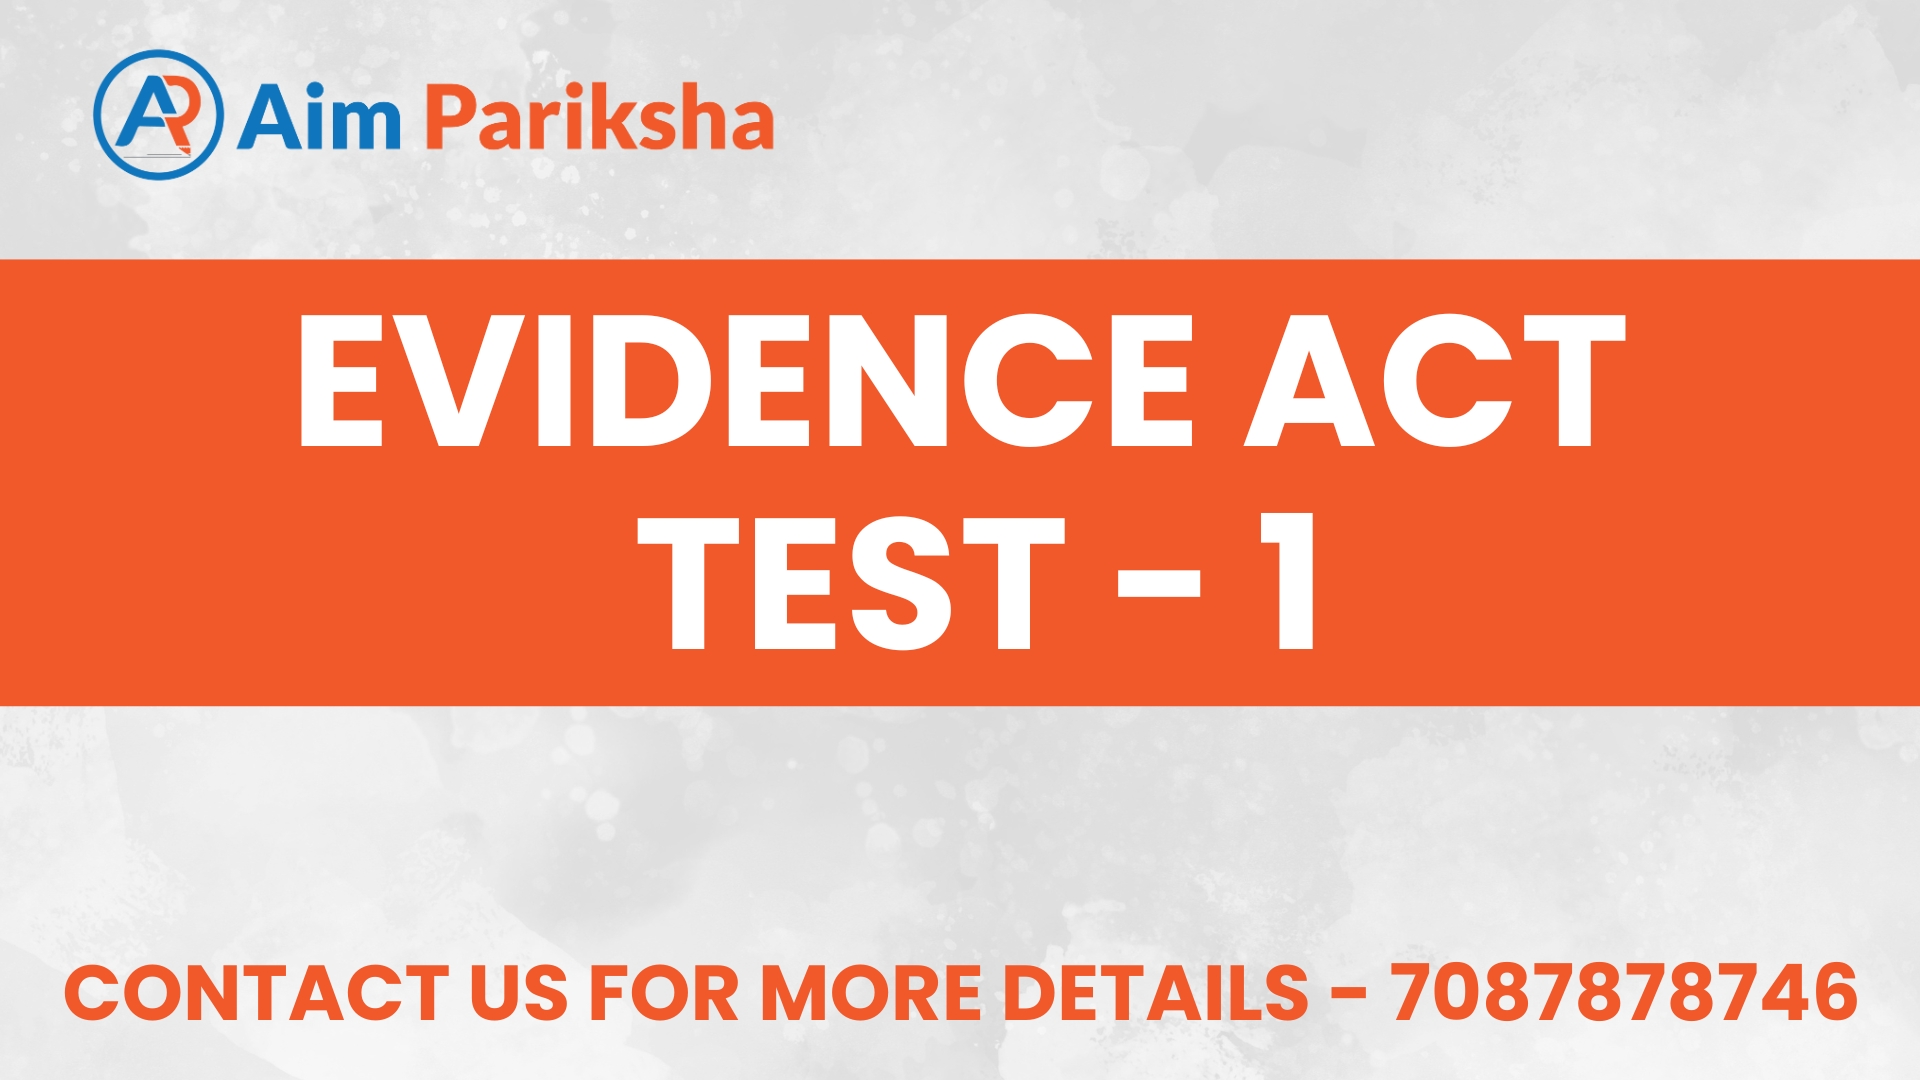 Evidence Act Test - 1